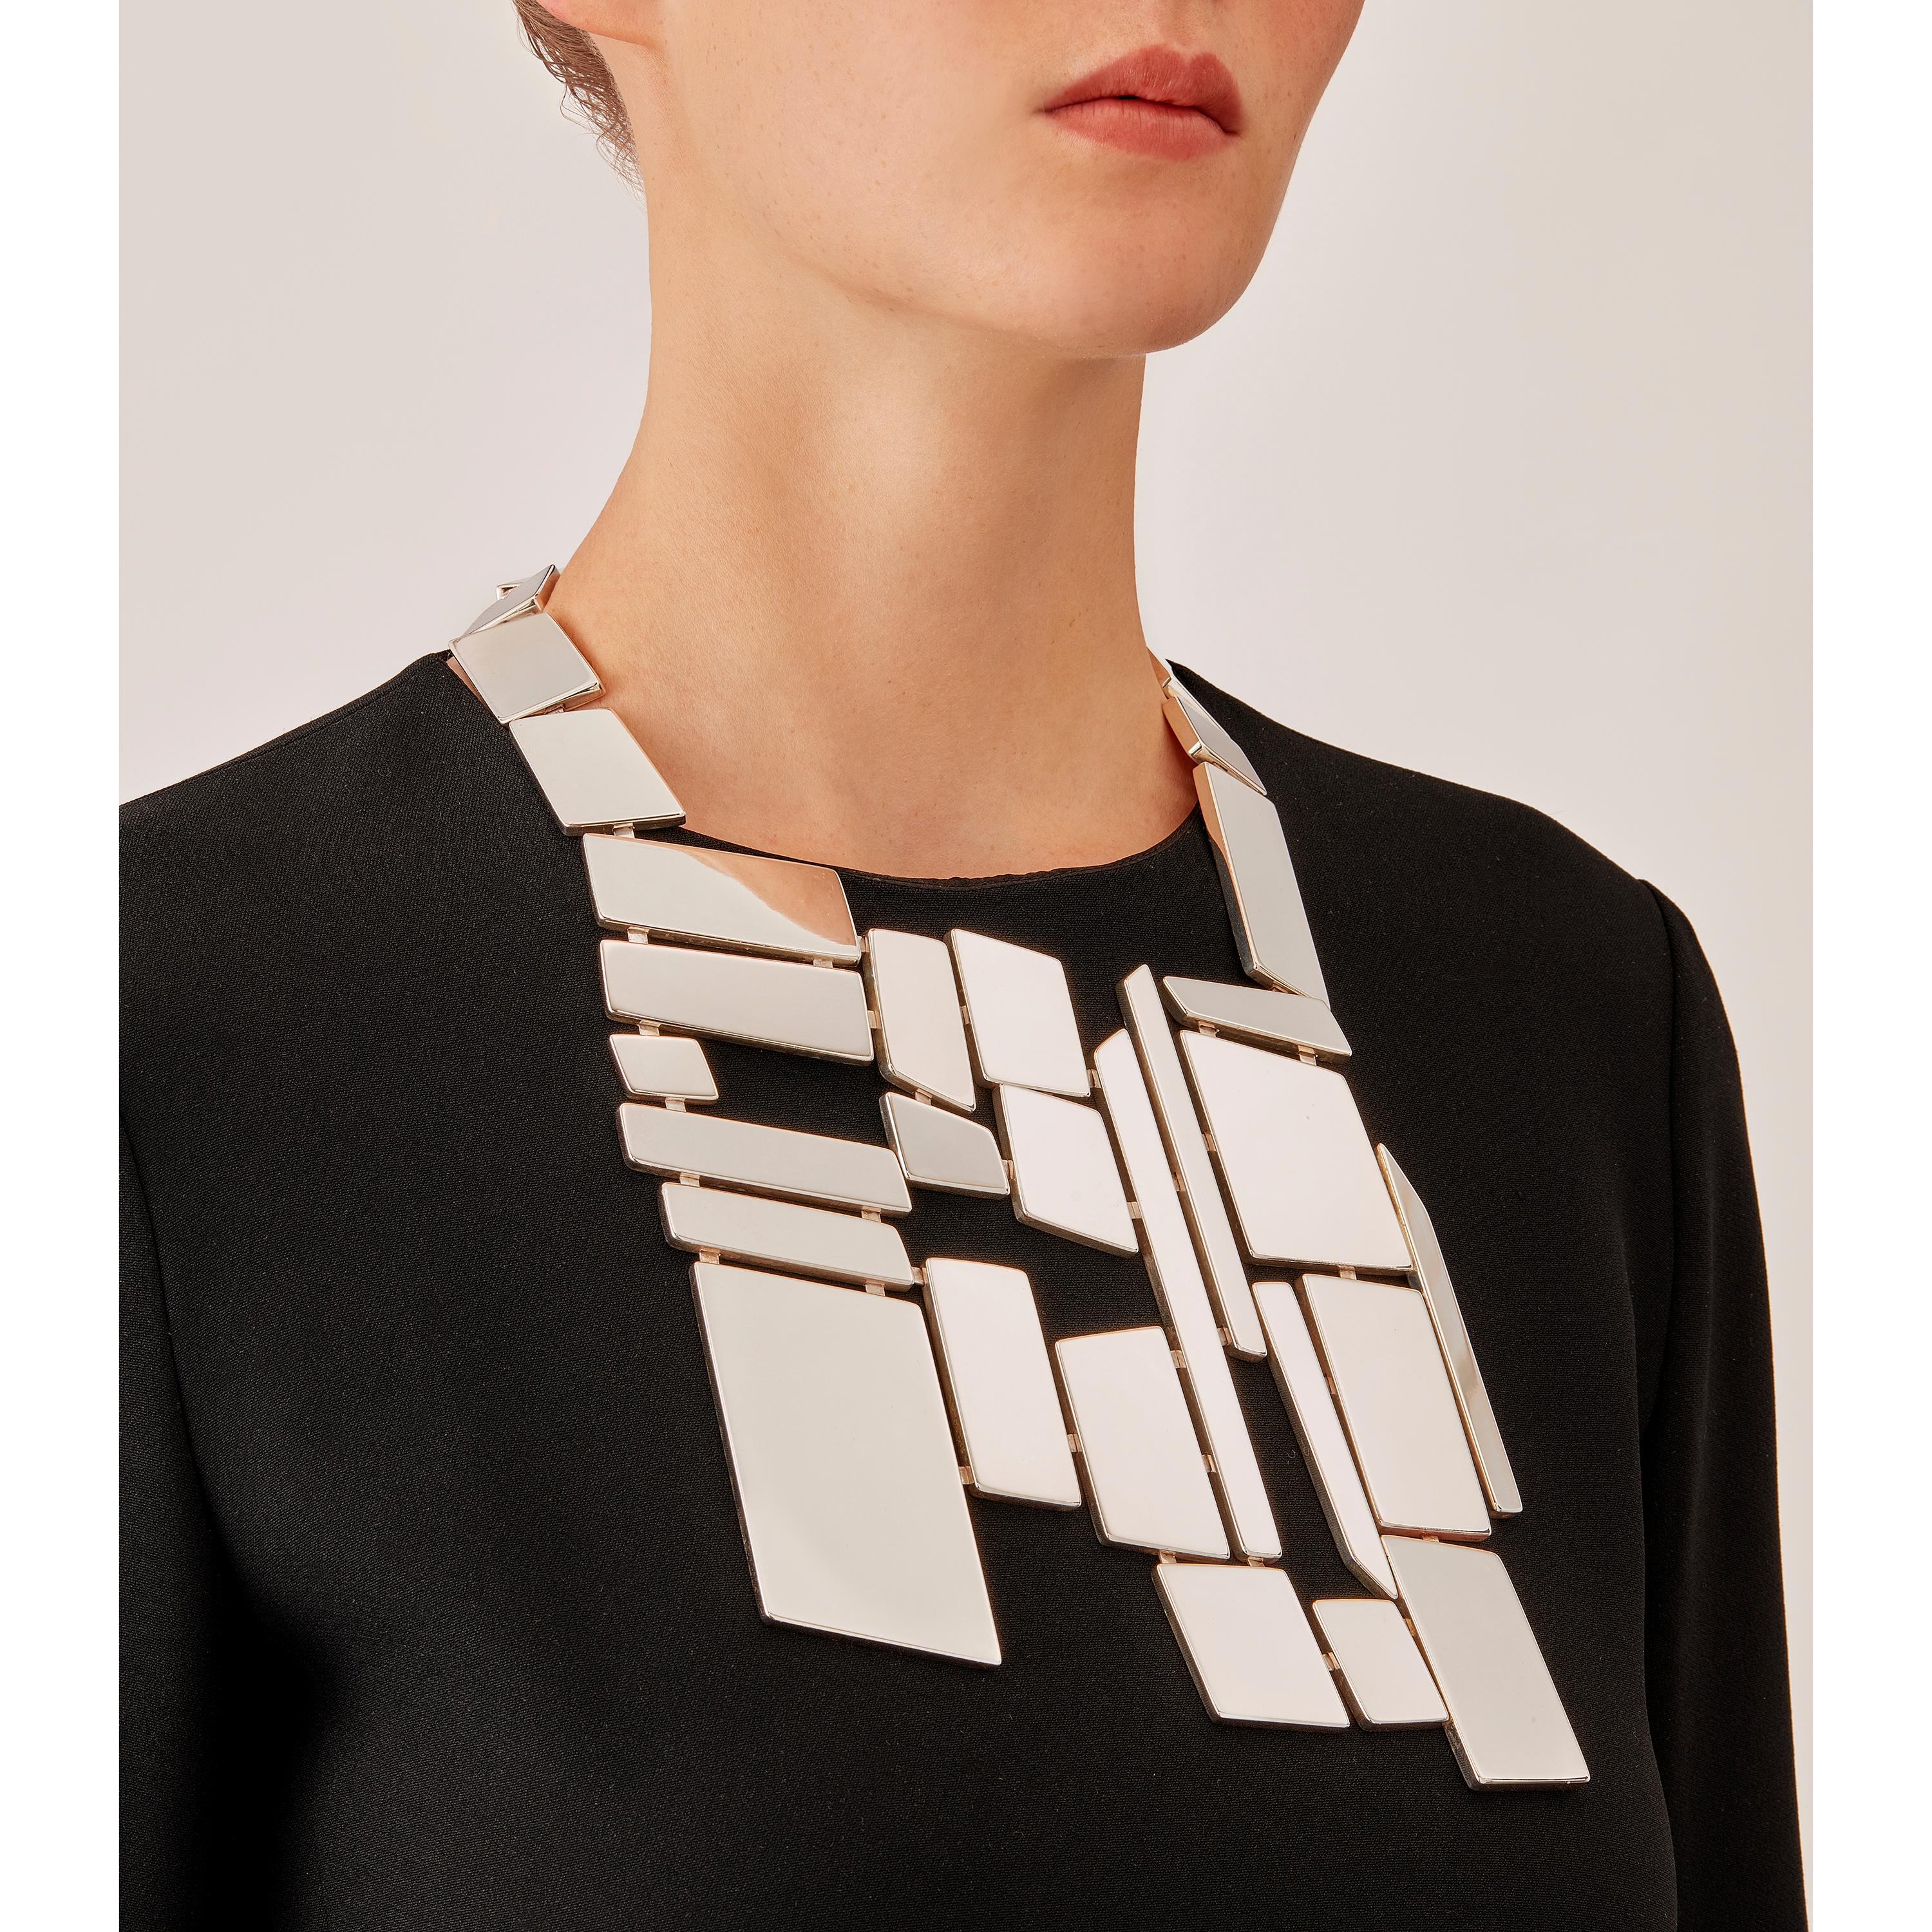 Made by hand in Nathalie Jean's Milan atelier in limited edition, Saphir Absolu Pectoral is a contemporary drop necklace composed of light hollow geometric volumes with rounded edges, in sterling silver. Clever hidden links allow the pieces to drape